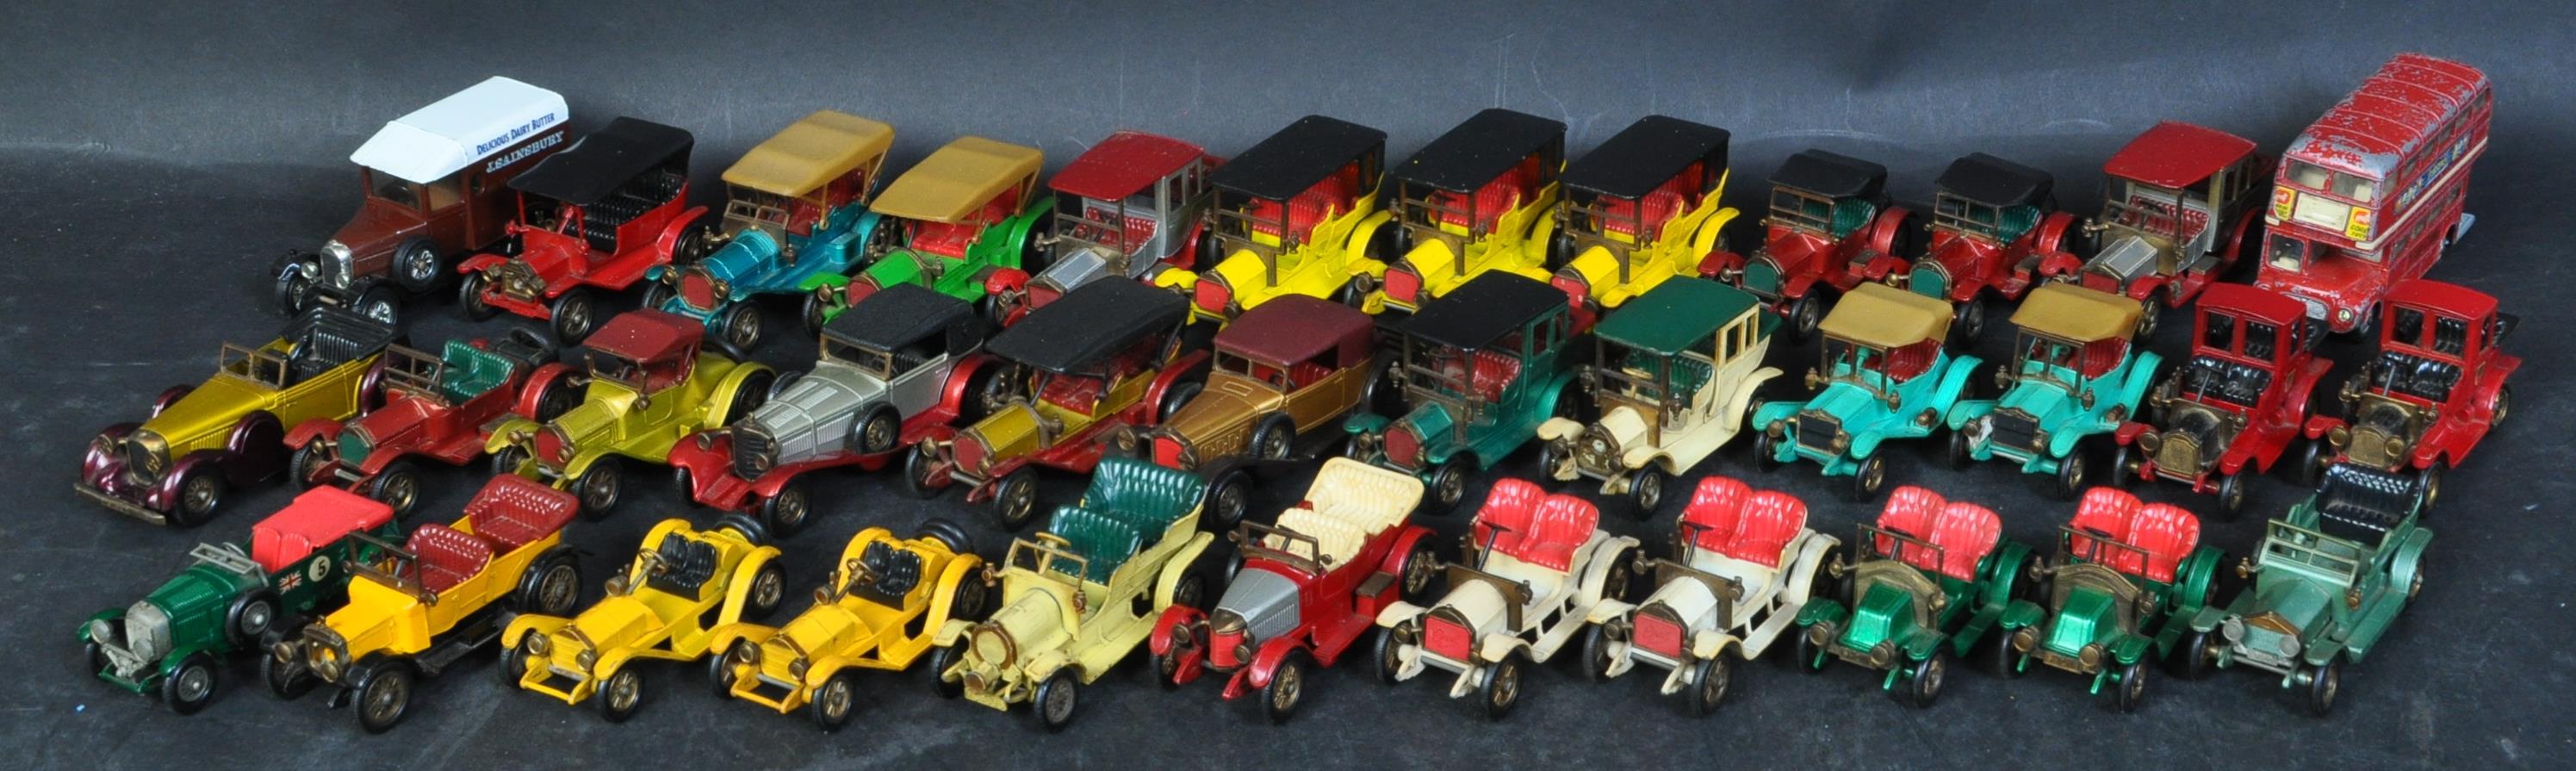 VINTAGE THIRTY-FIVE LESNEY PRODUCTS DIECAST MDOEL CARS